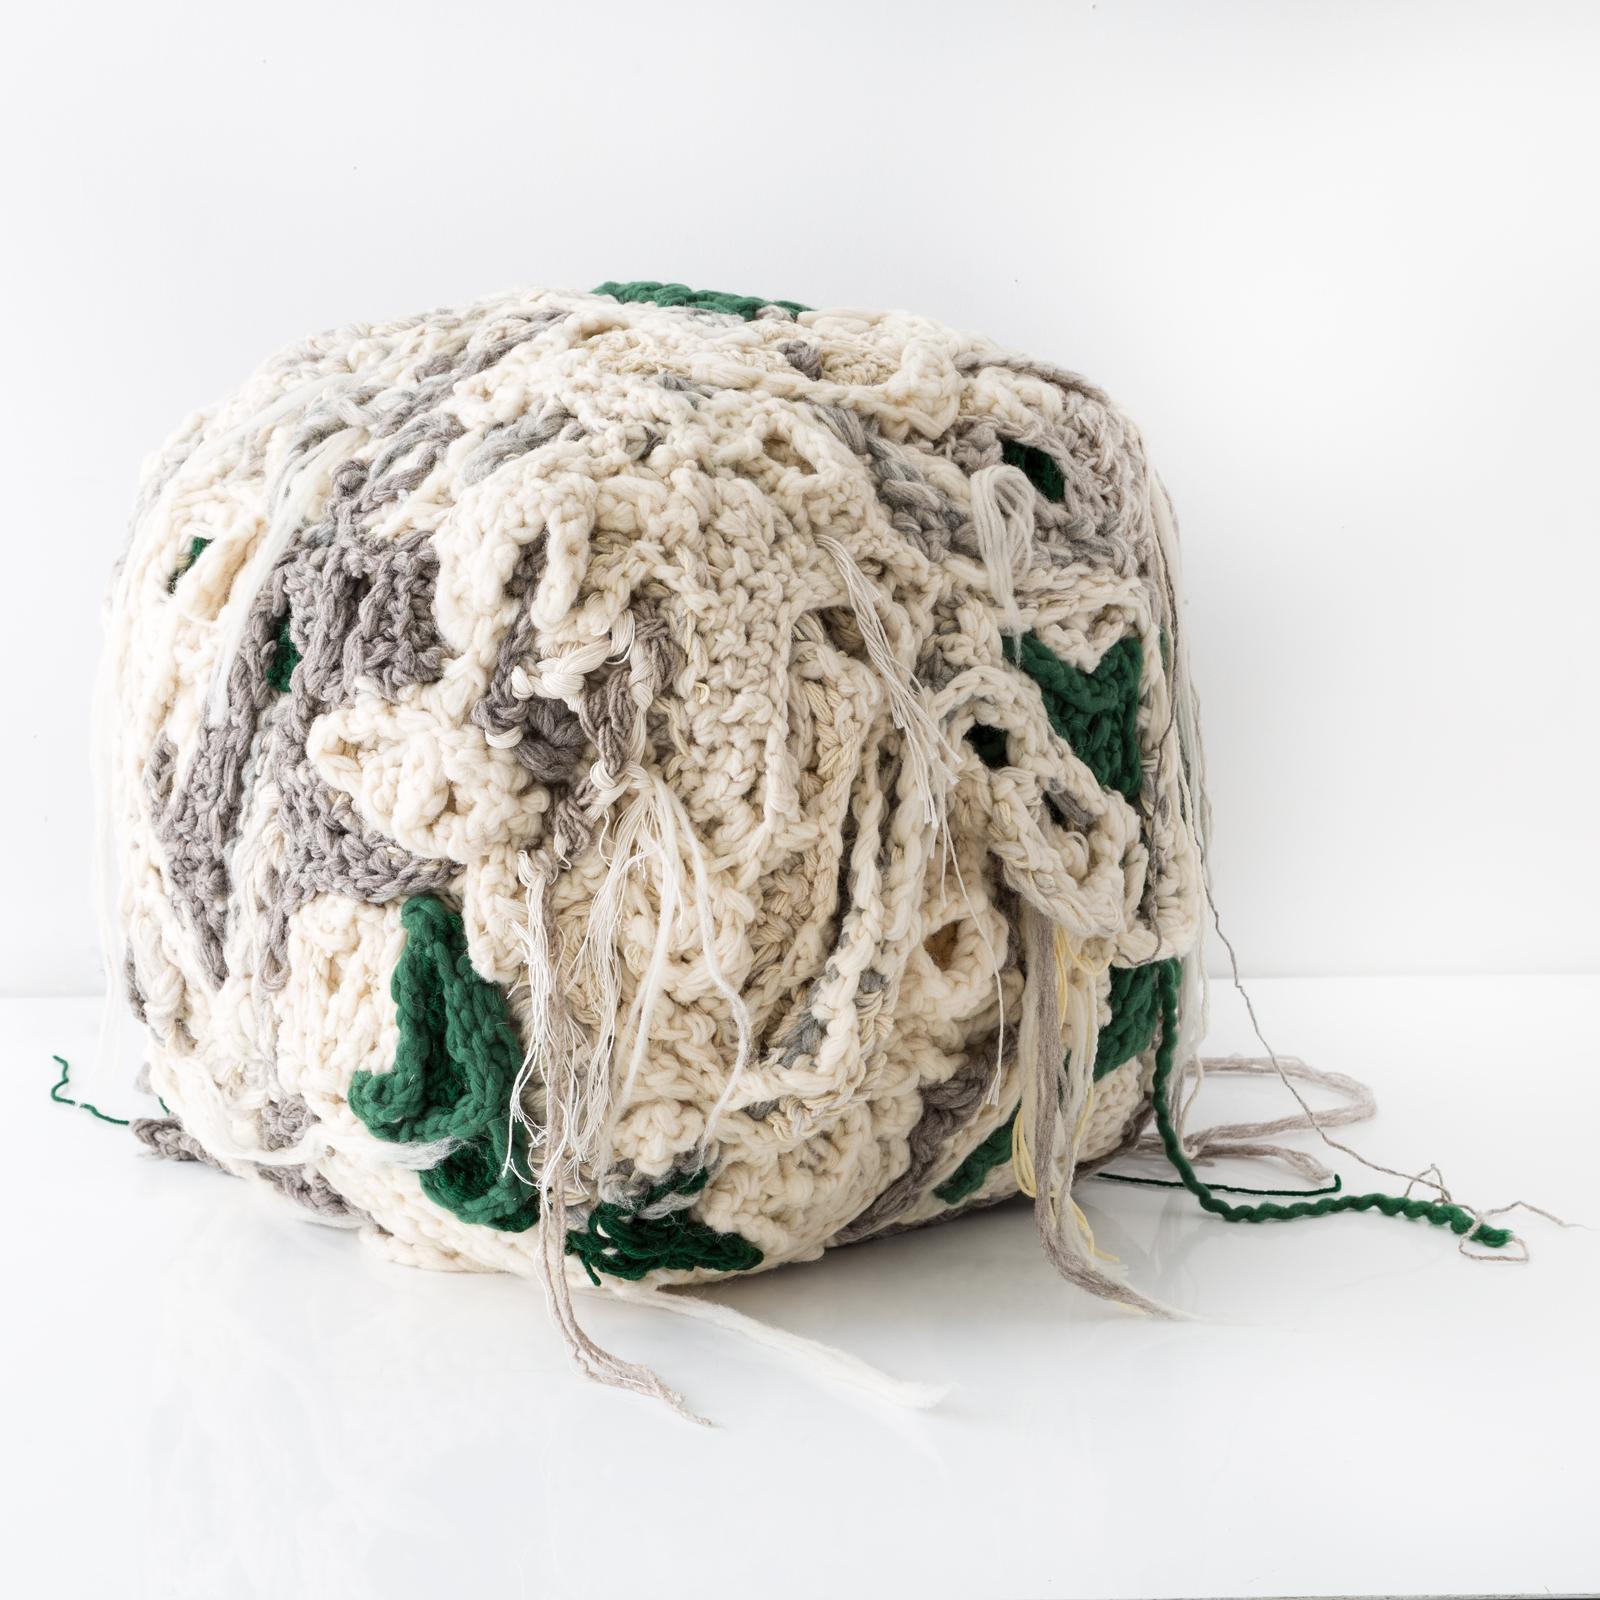 Further forms are a grouping of bright and hairy ottomans that have creature-like qualities. Tamika Rivera sculpts the Forms by wrapping, knitting and knotting yarn and string onto stuffed geometric forms. She builds off these forms to create this